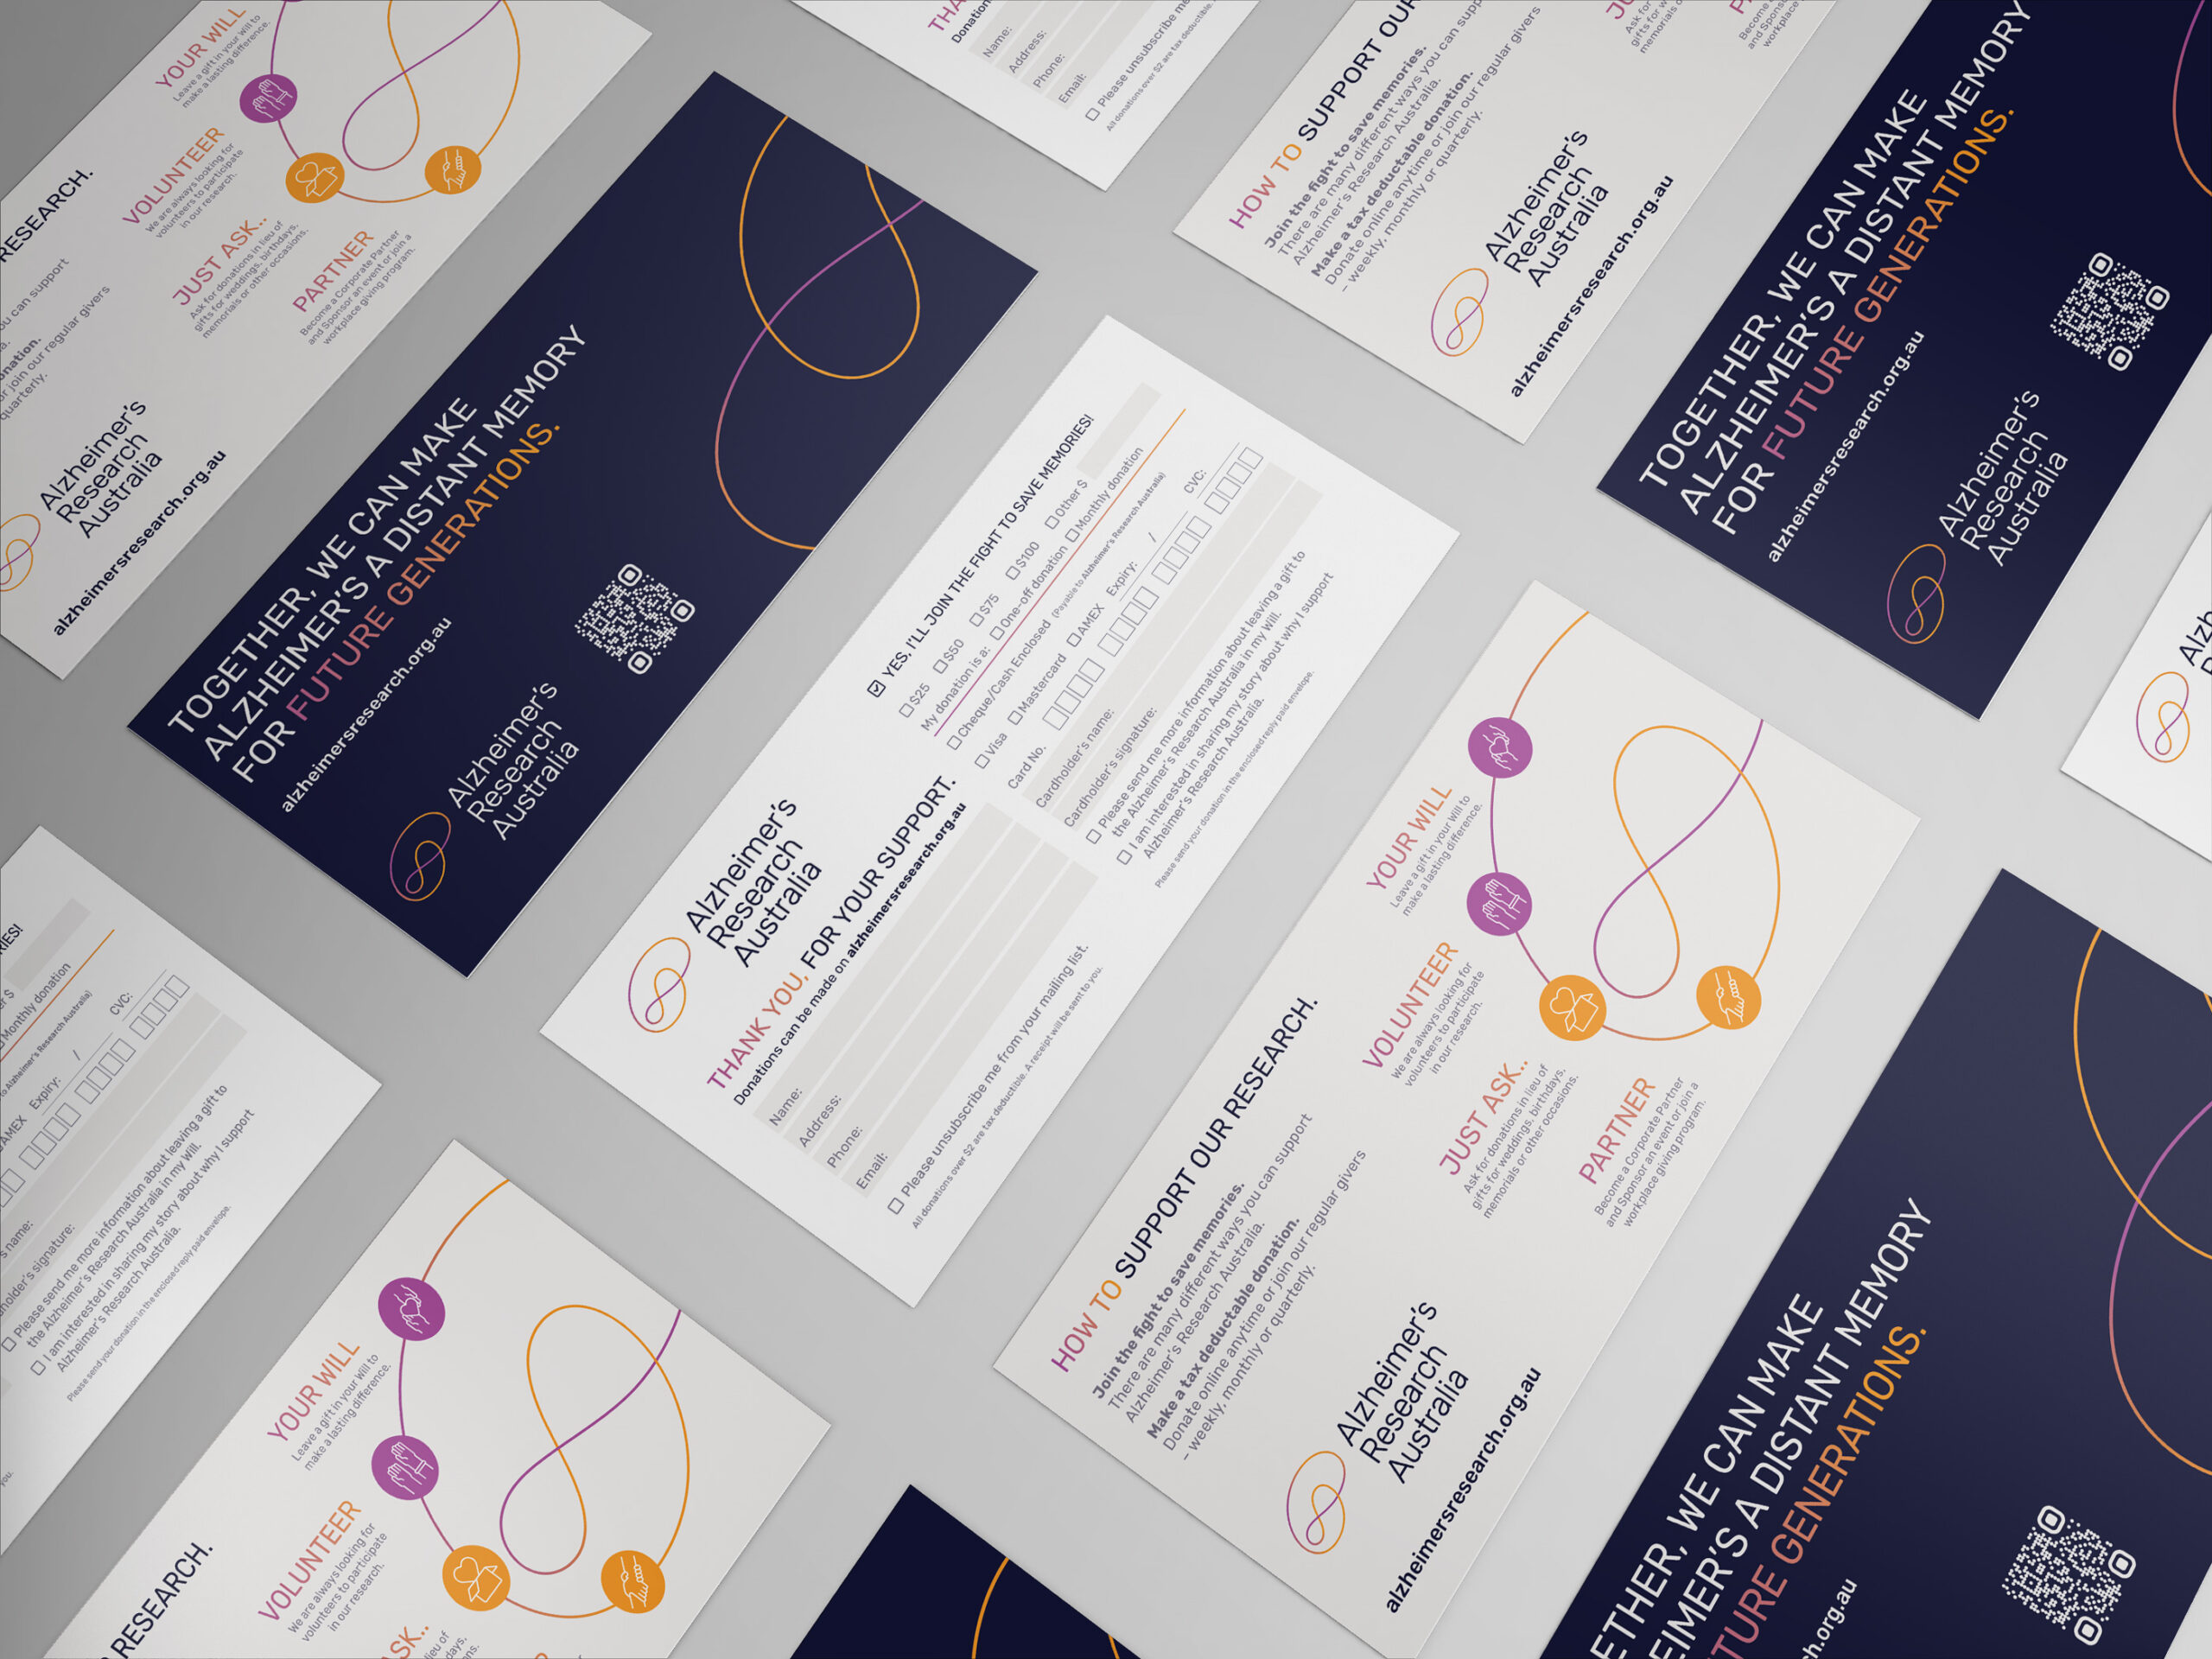 Alzheimer's Research Australia Graphic Design, Merchandise and Signage and Annual Report Design and Development by TL Design Co.